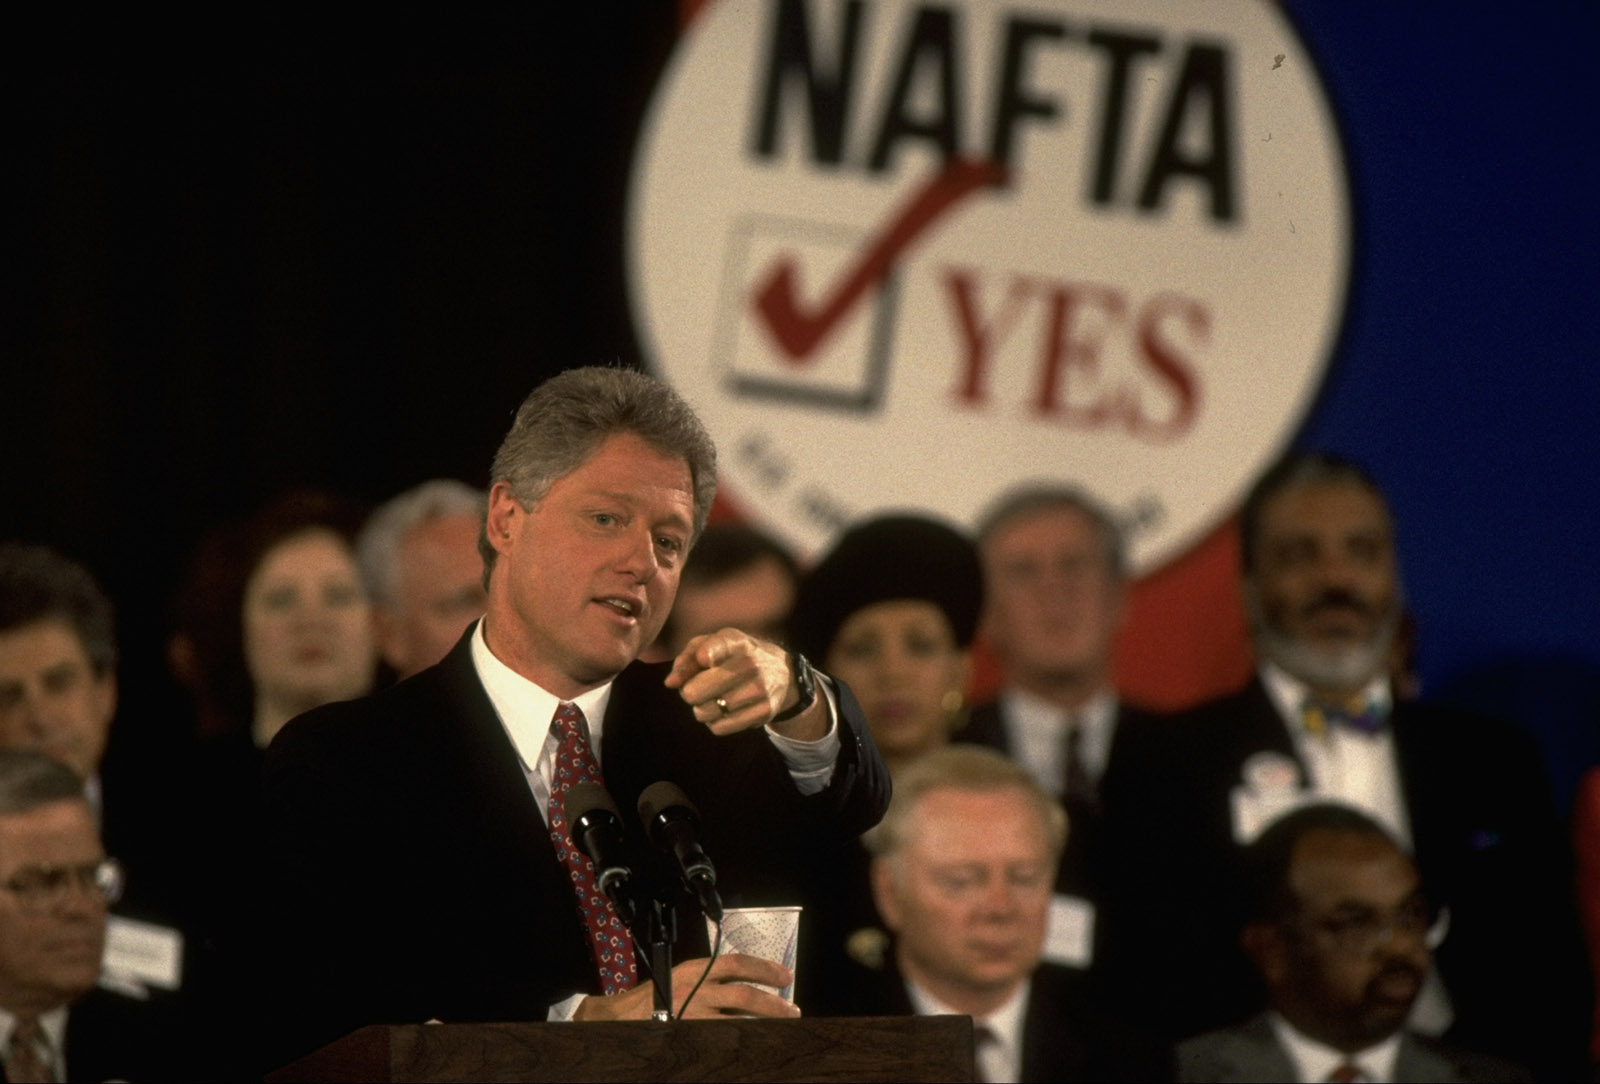 President Bill Clinton addressing a Chamber of Commerce group about NAFTA, 1993